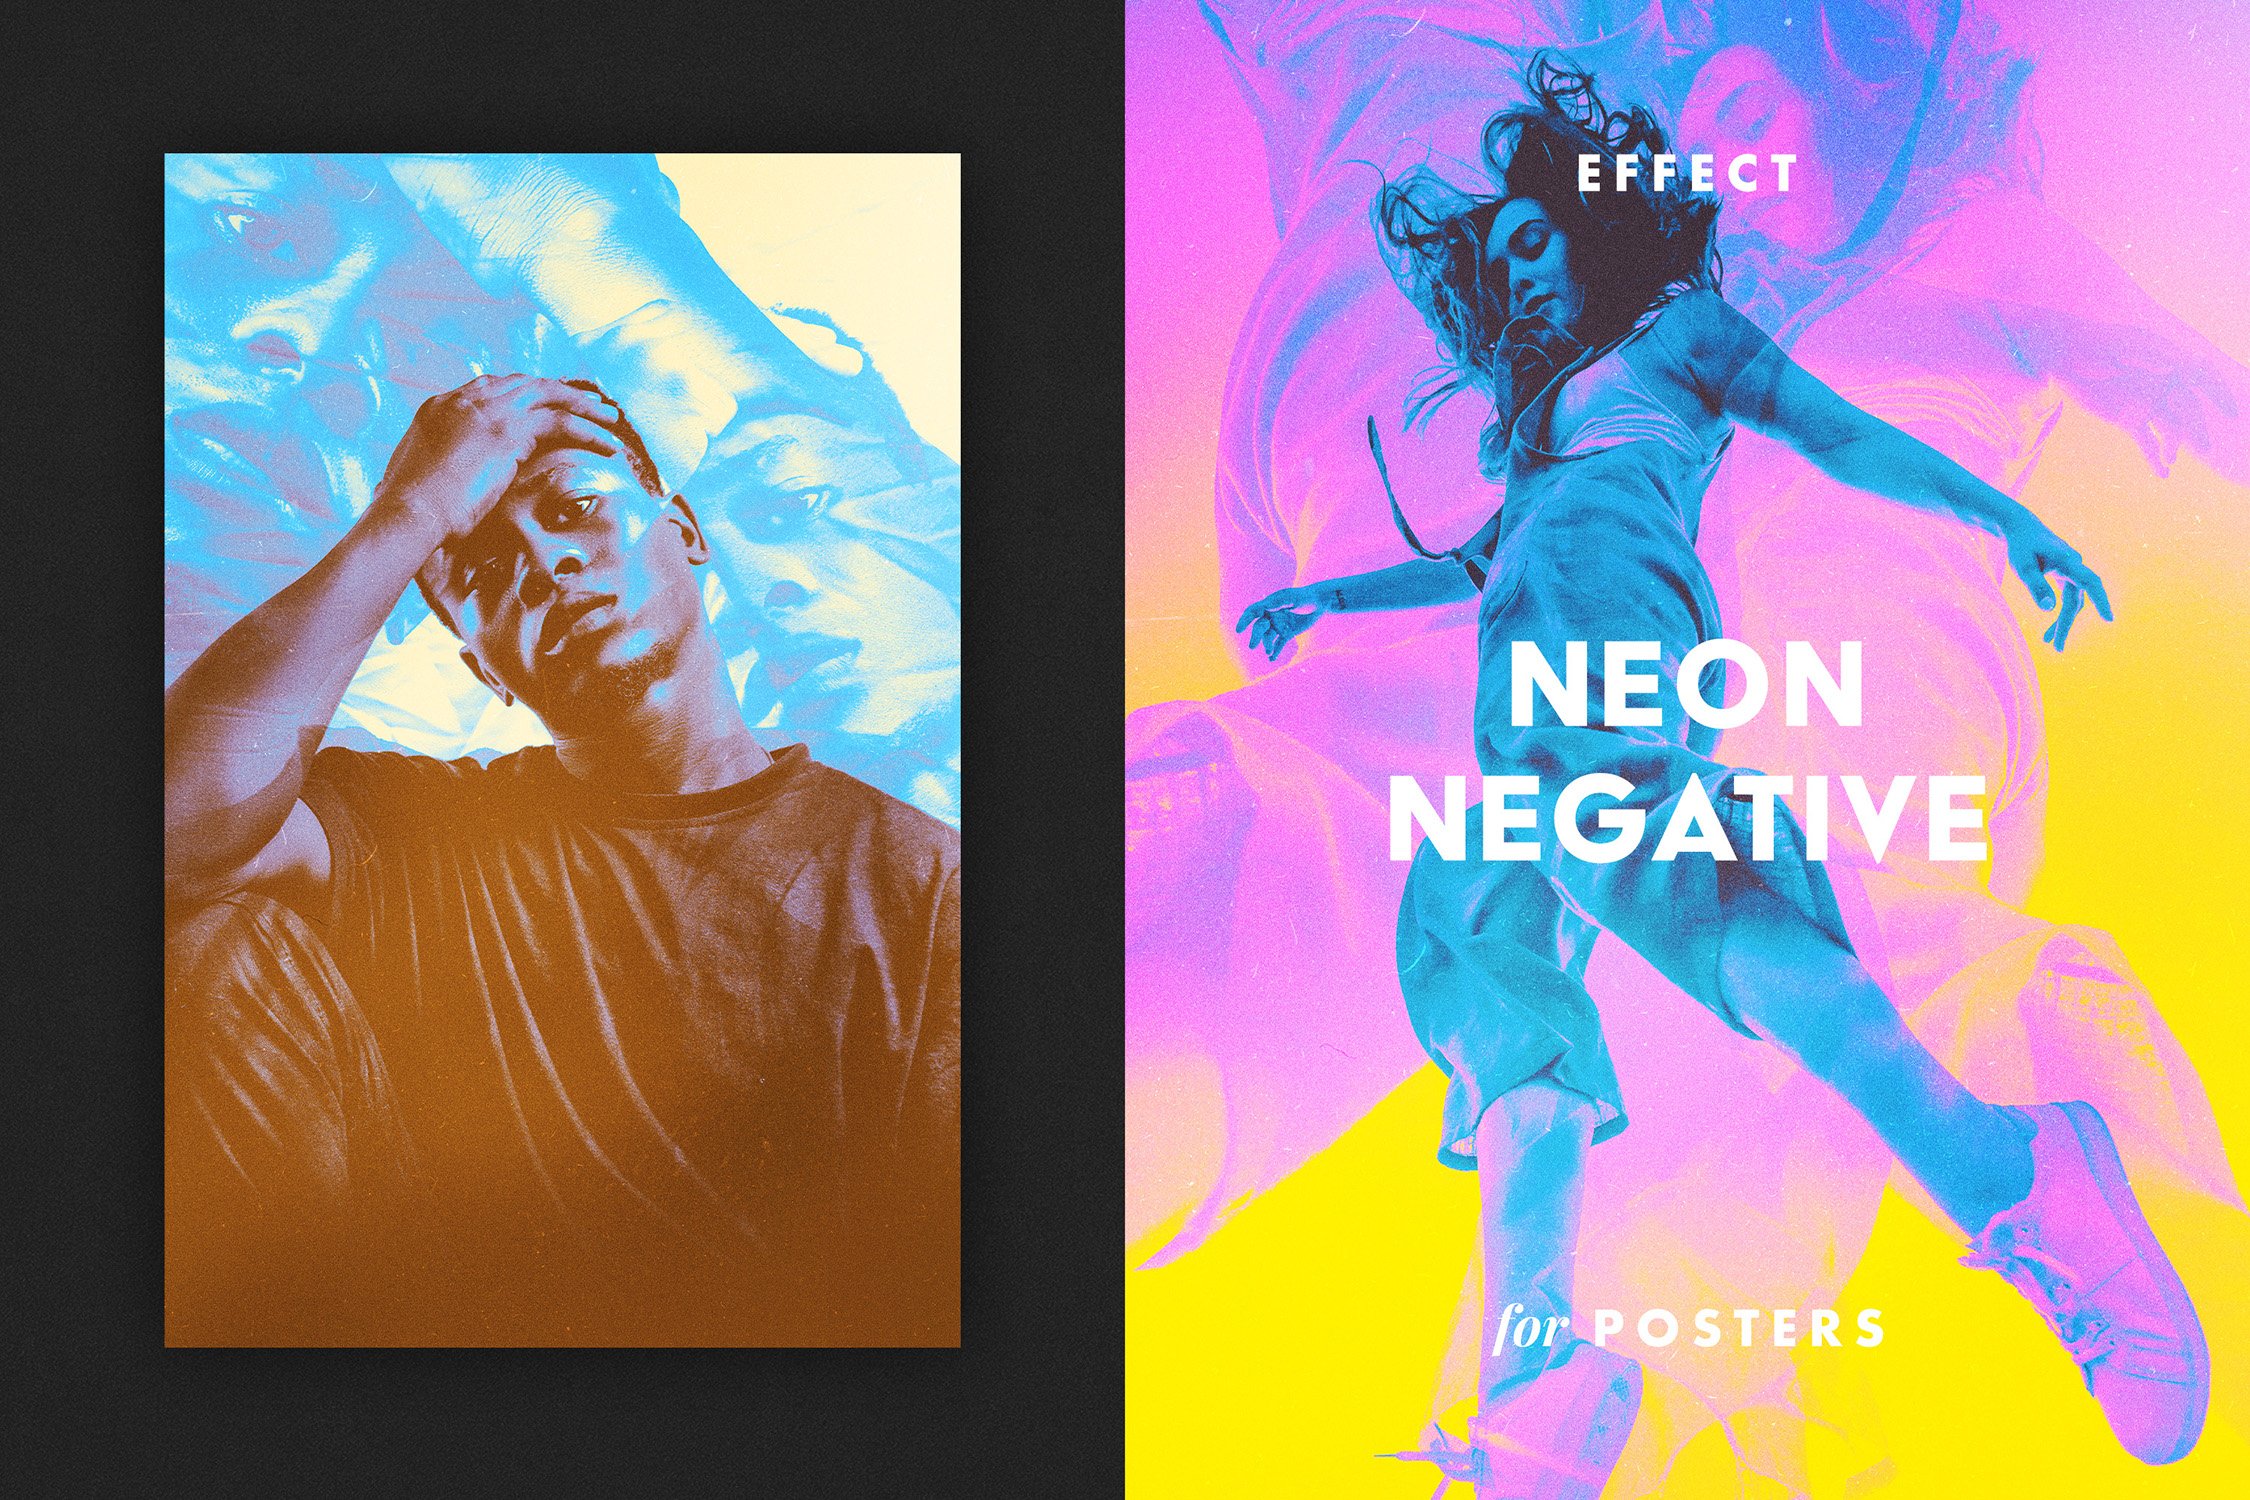 neon negative effect for posters 01 466